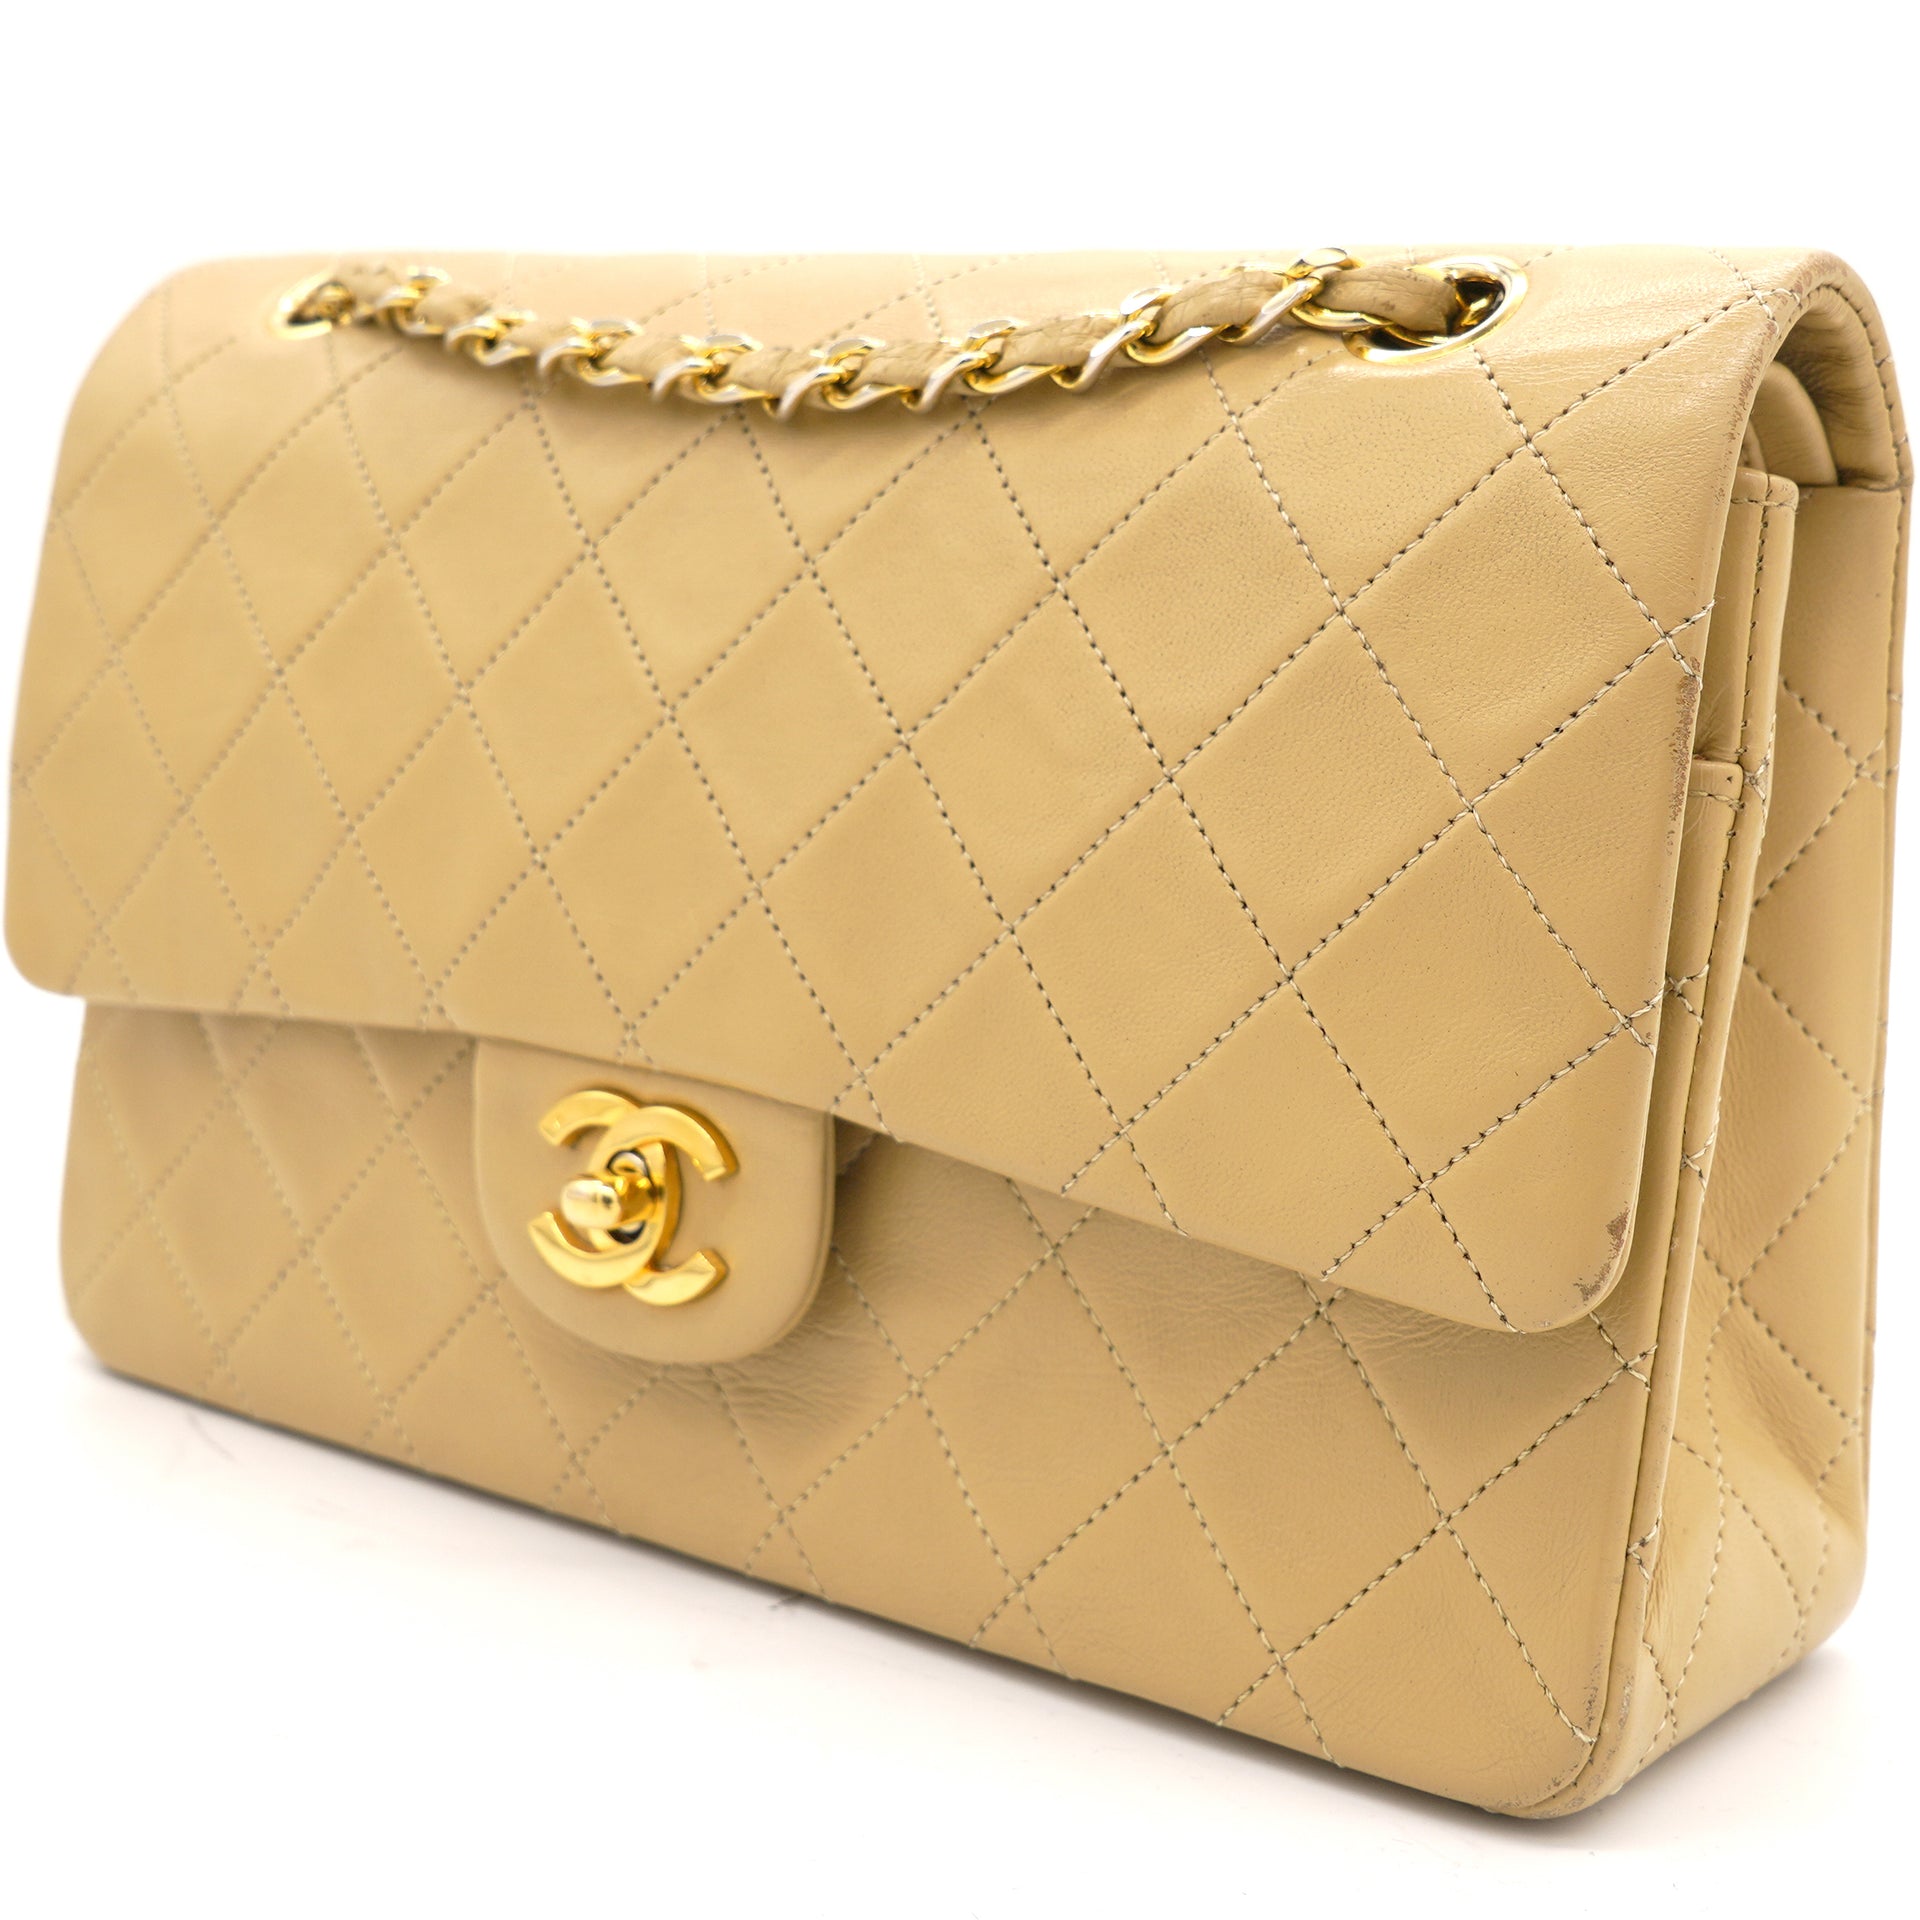 Chanel Beige Quilted Lambskin Leather Medium Classic Vintage